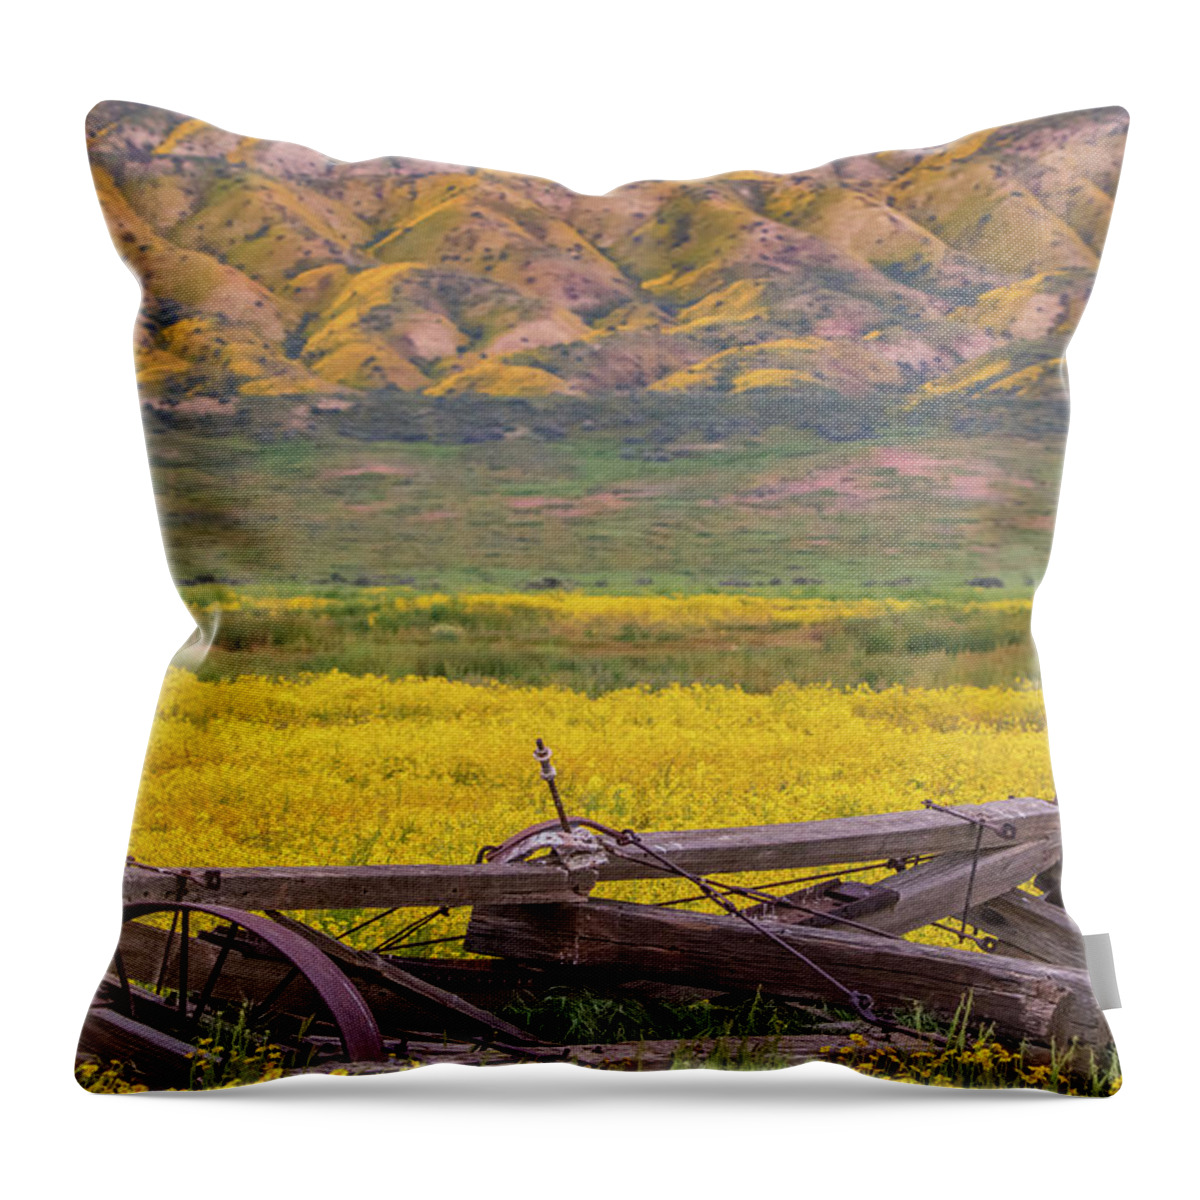 California Throw Pillow featuring the photograph Broken Wagon in a Field of Flowers by Marc Crumpler